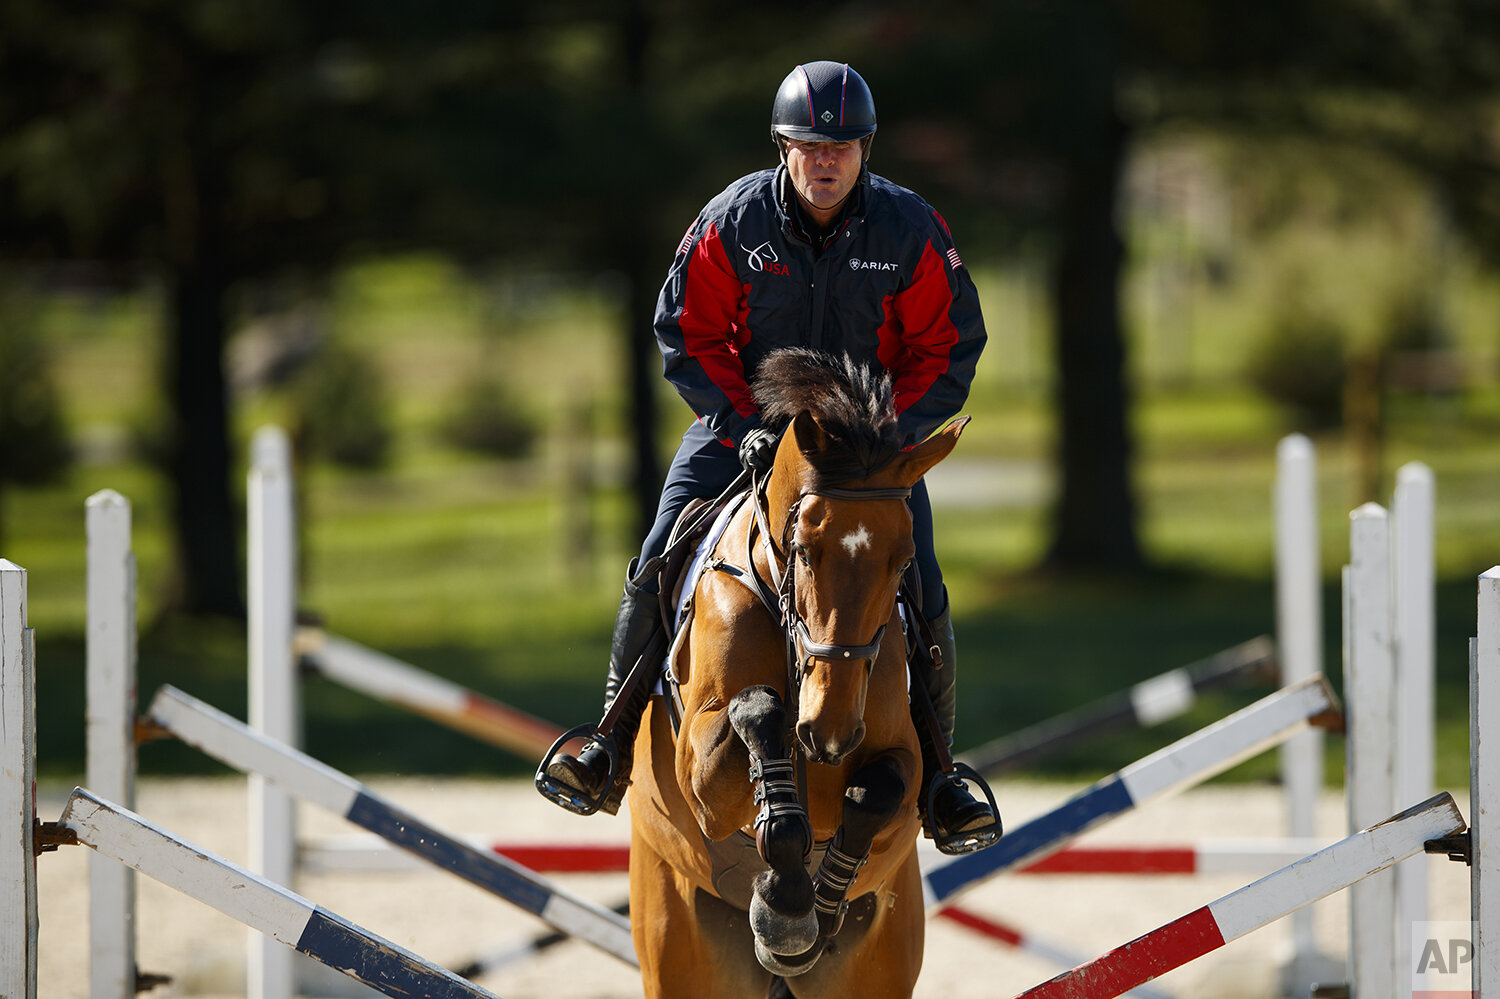  Phillip Dutton, a medal-winning equestrian on the U.S. Olympic team, rides Z, through a series of jumps while training at his farm, Thursday, April 2, 2020, in West Grove, Pa. (AP Photo/Matt Slocum) 